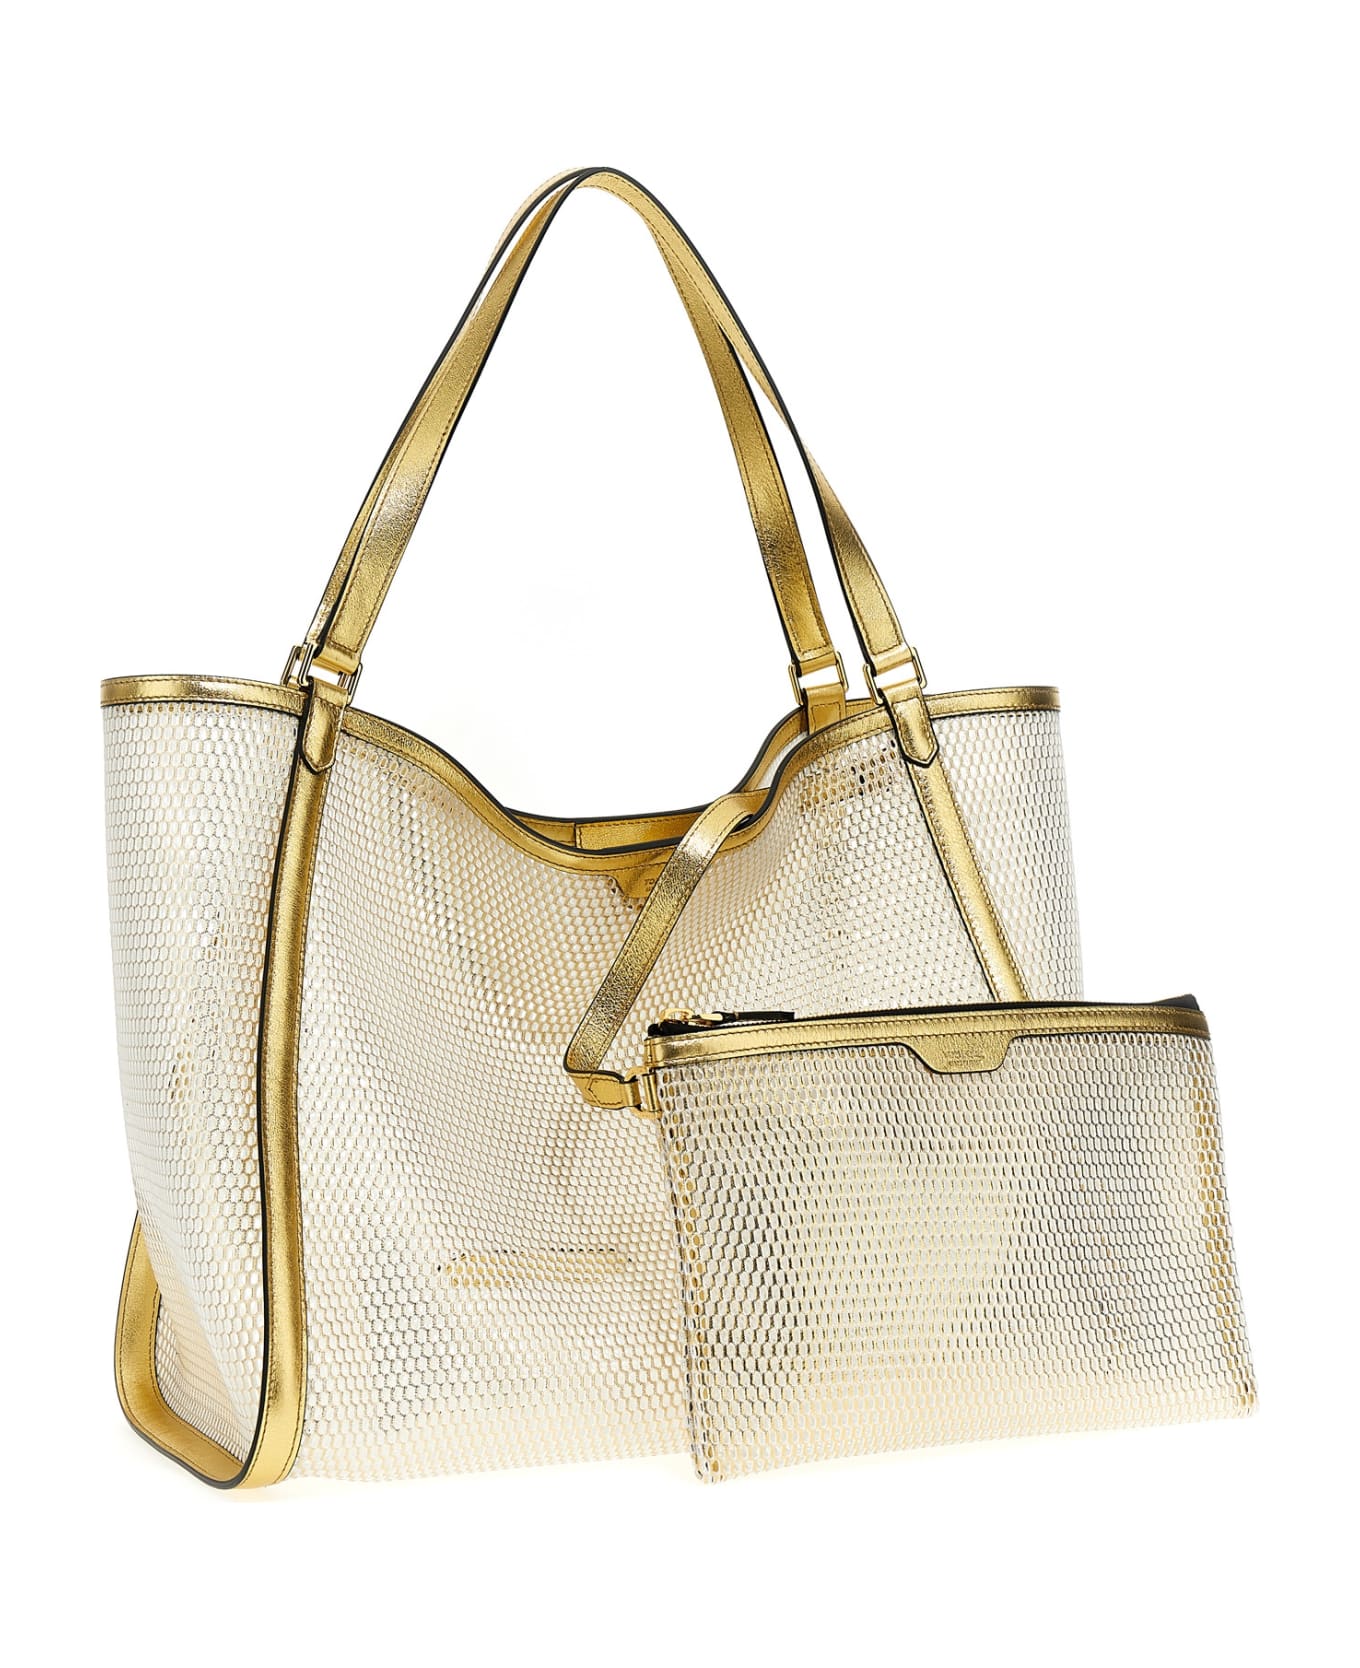 Tom Ford Laminated Leather Mesh Shopping Bag - Gold